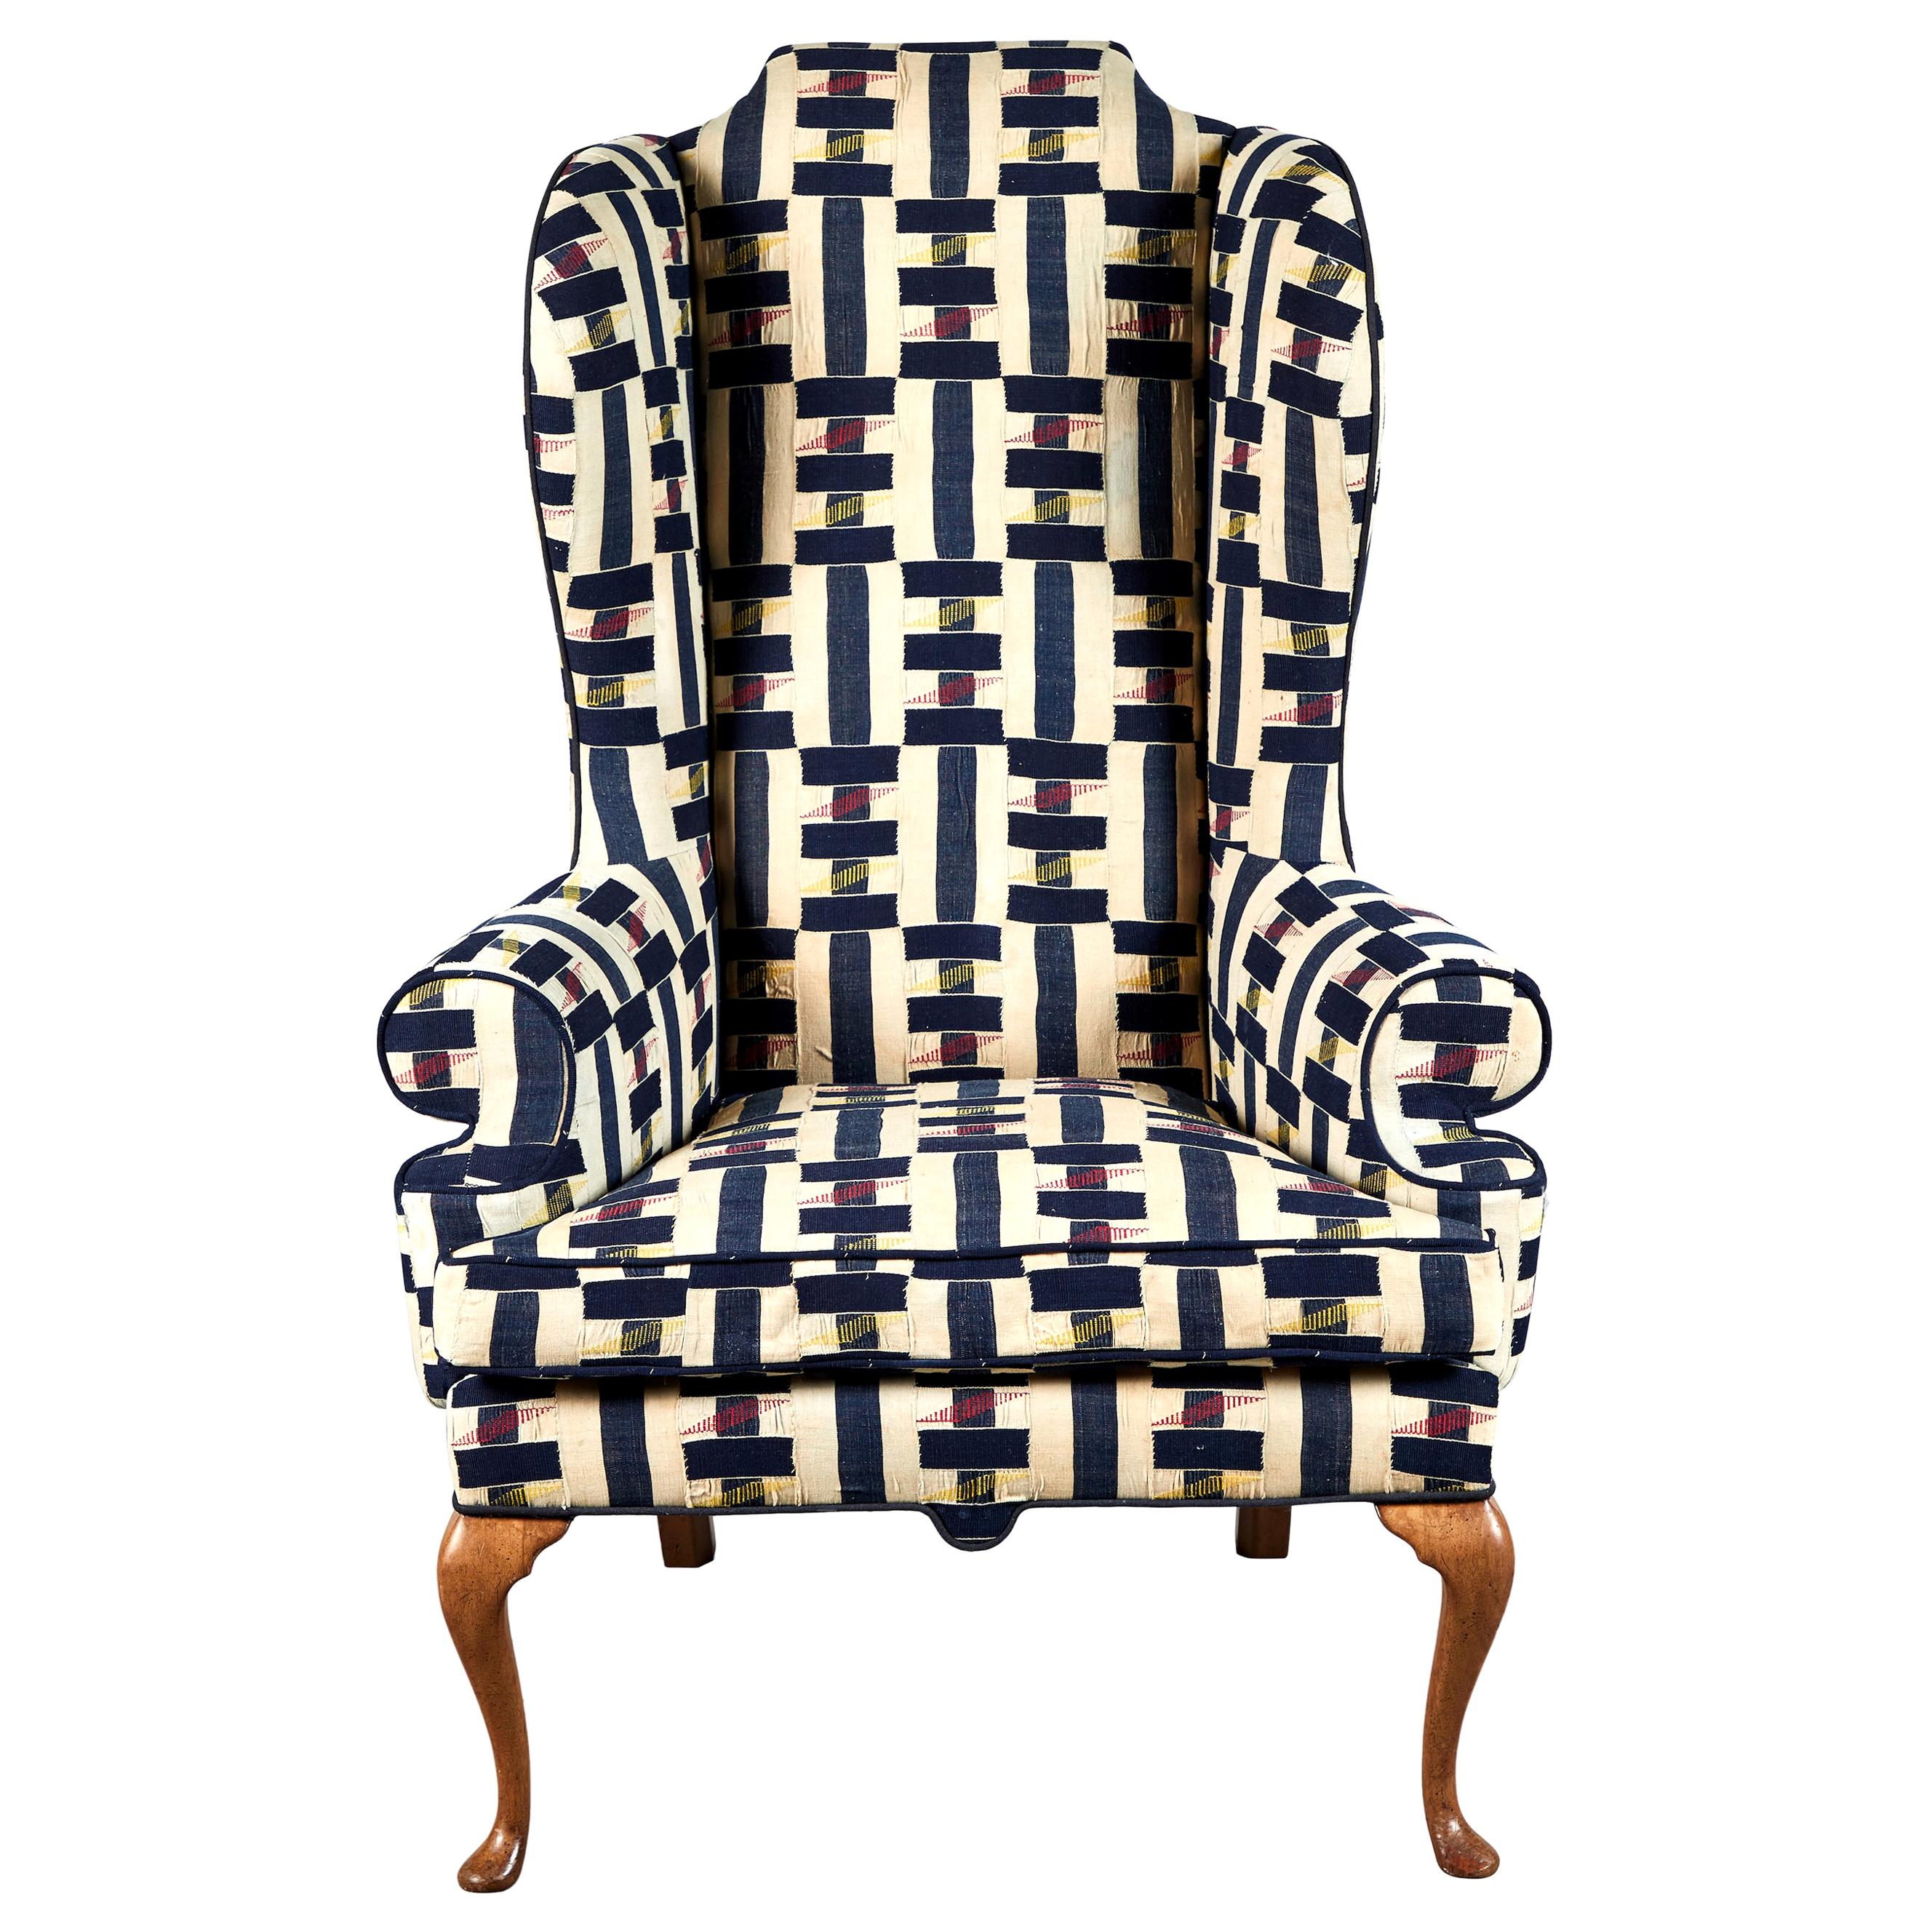 Vintage wingback chair in multicolored ewe fabric from Ghana, the African fabric is beautifully textured and handmade with accents of navy, natural and red. The chair is finished in a solid piping, the chairs have original finish on the cabriole